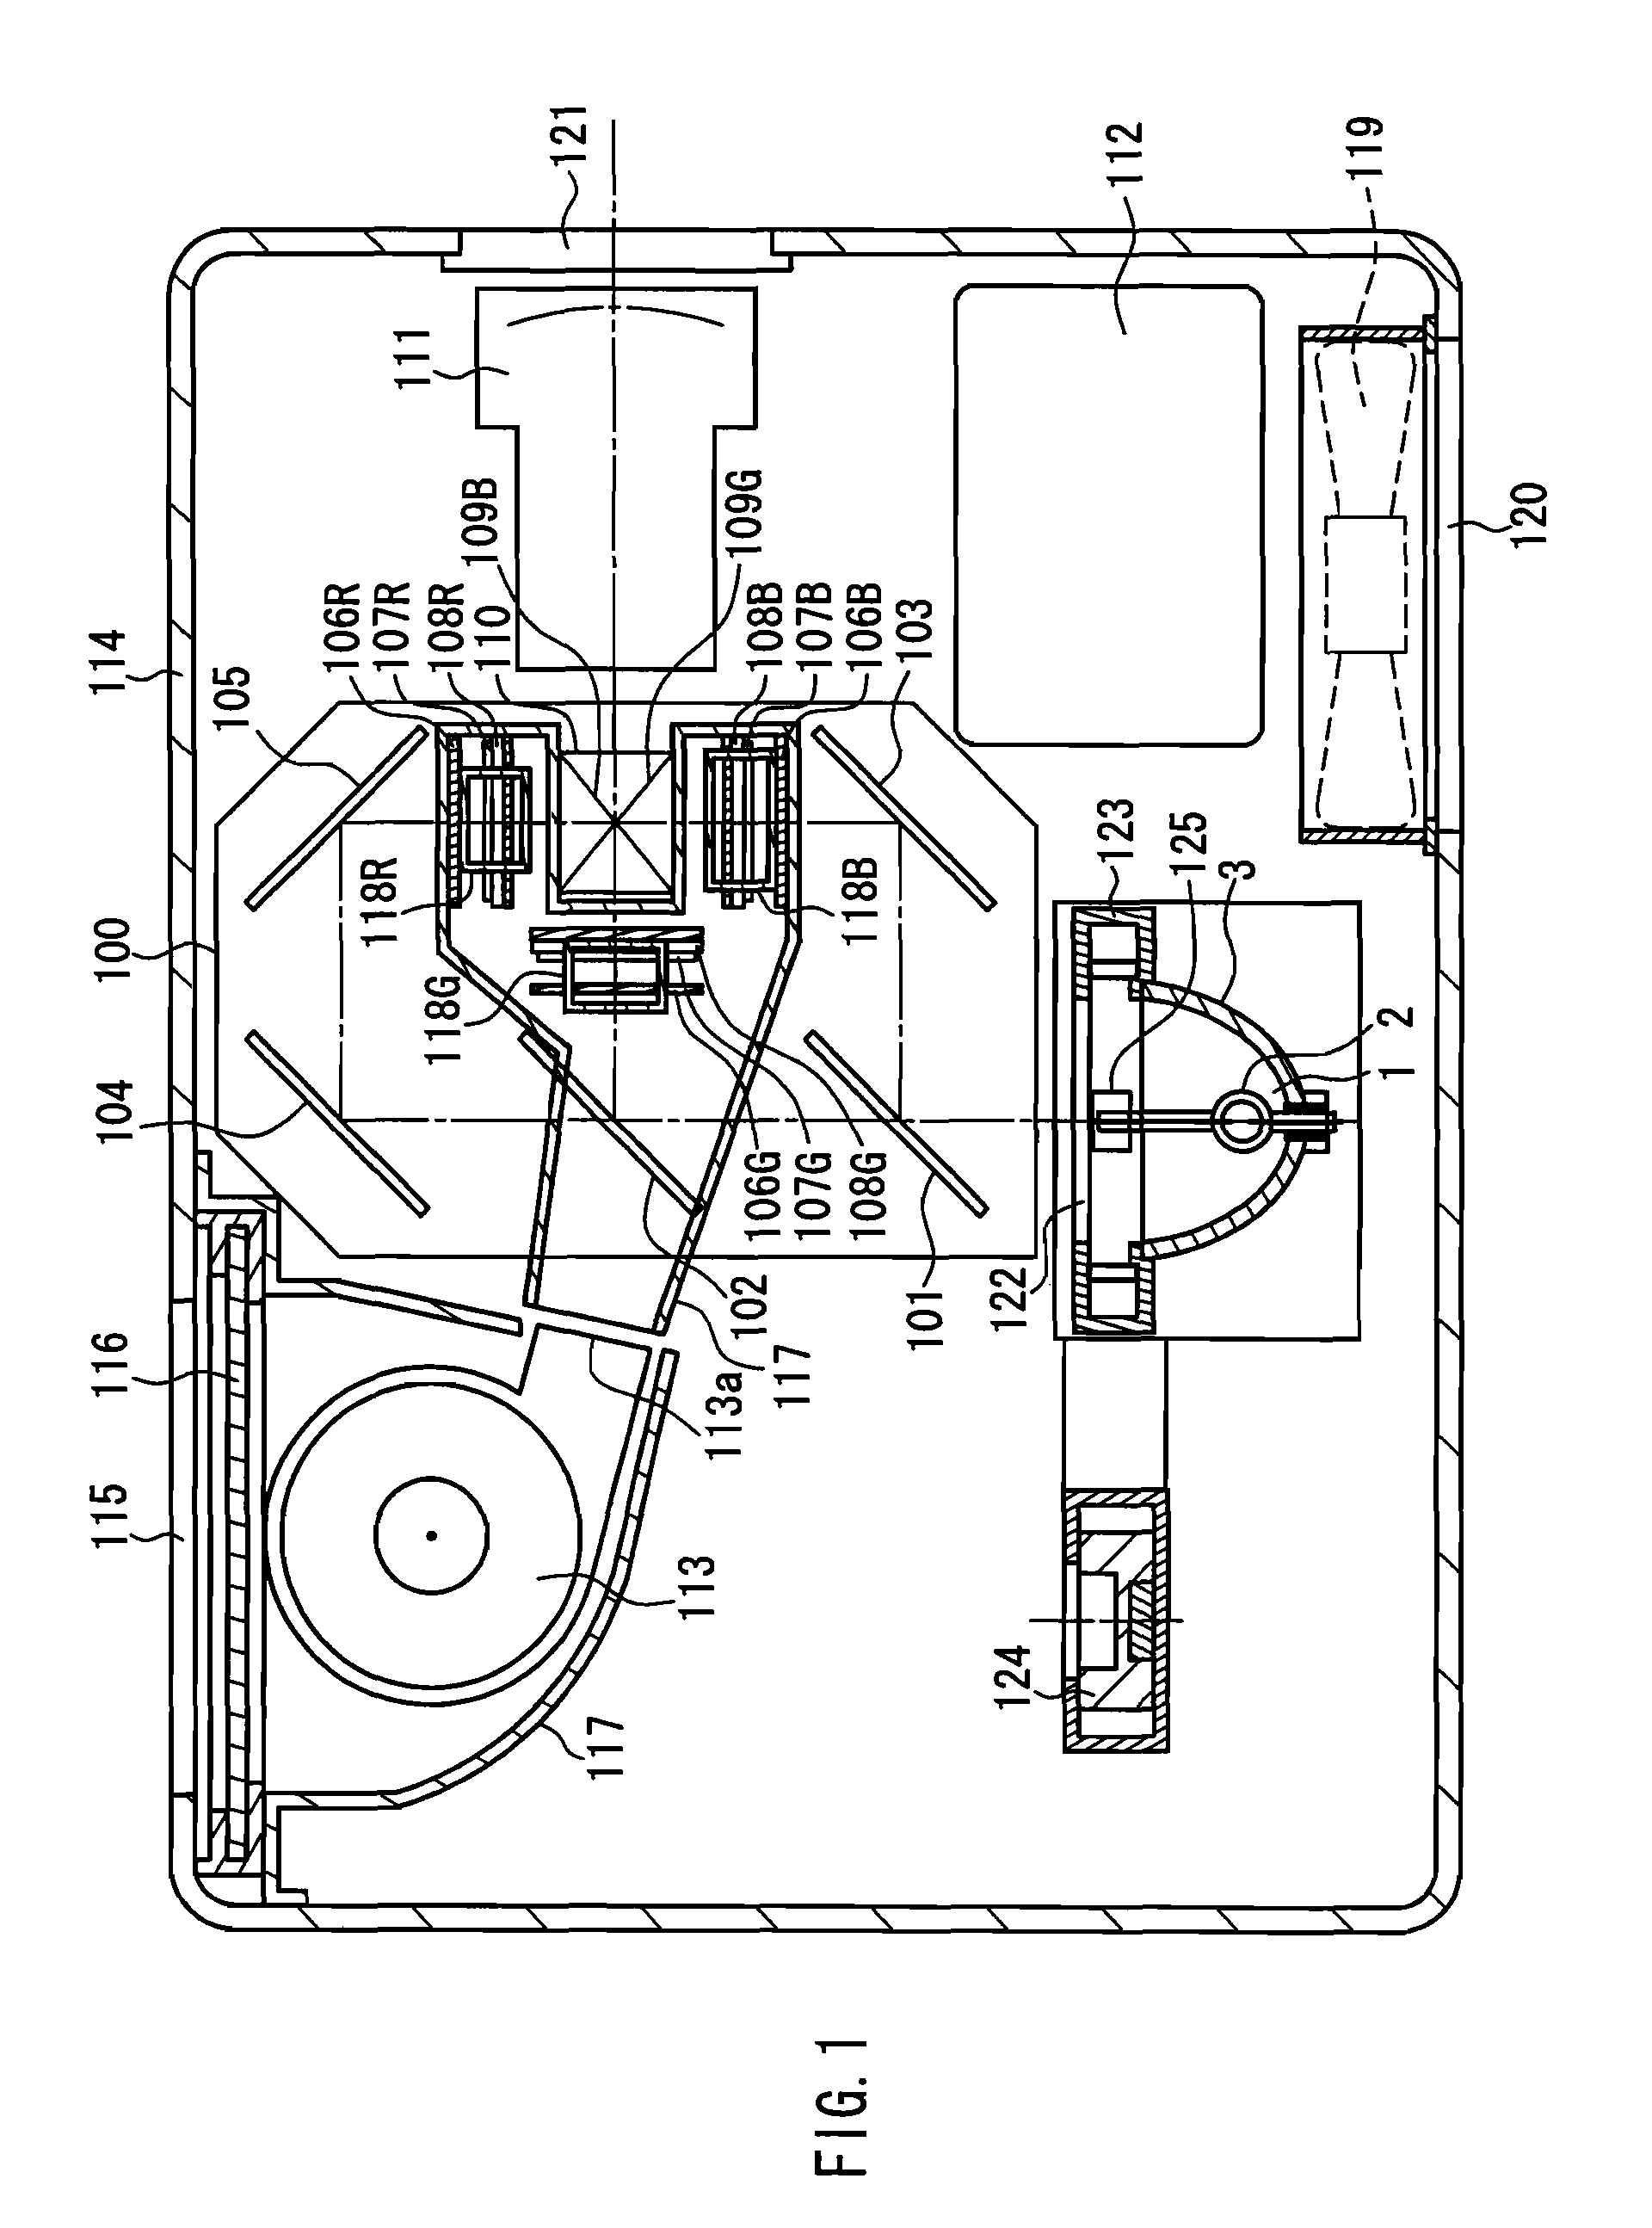 Projection display device with a cooling air fan